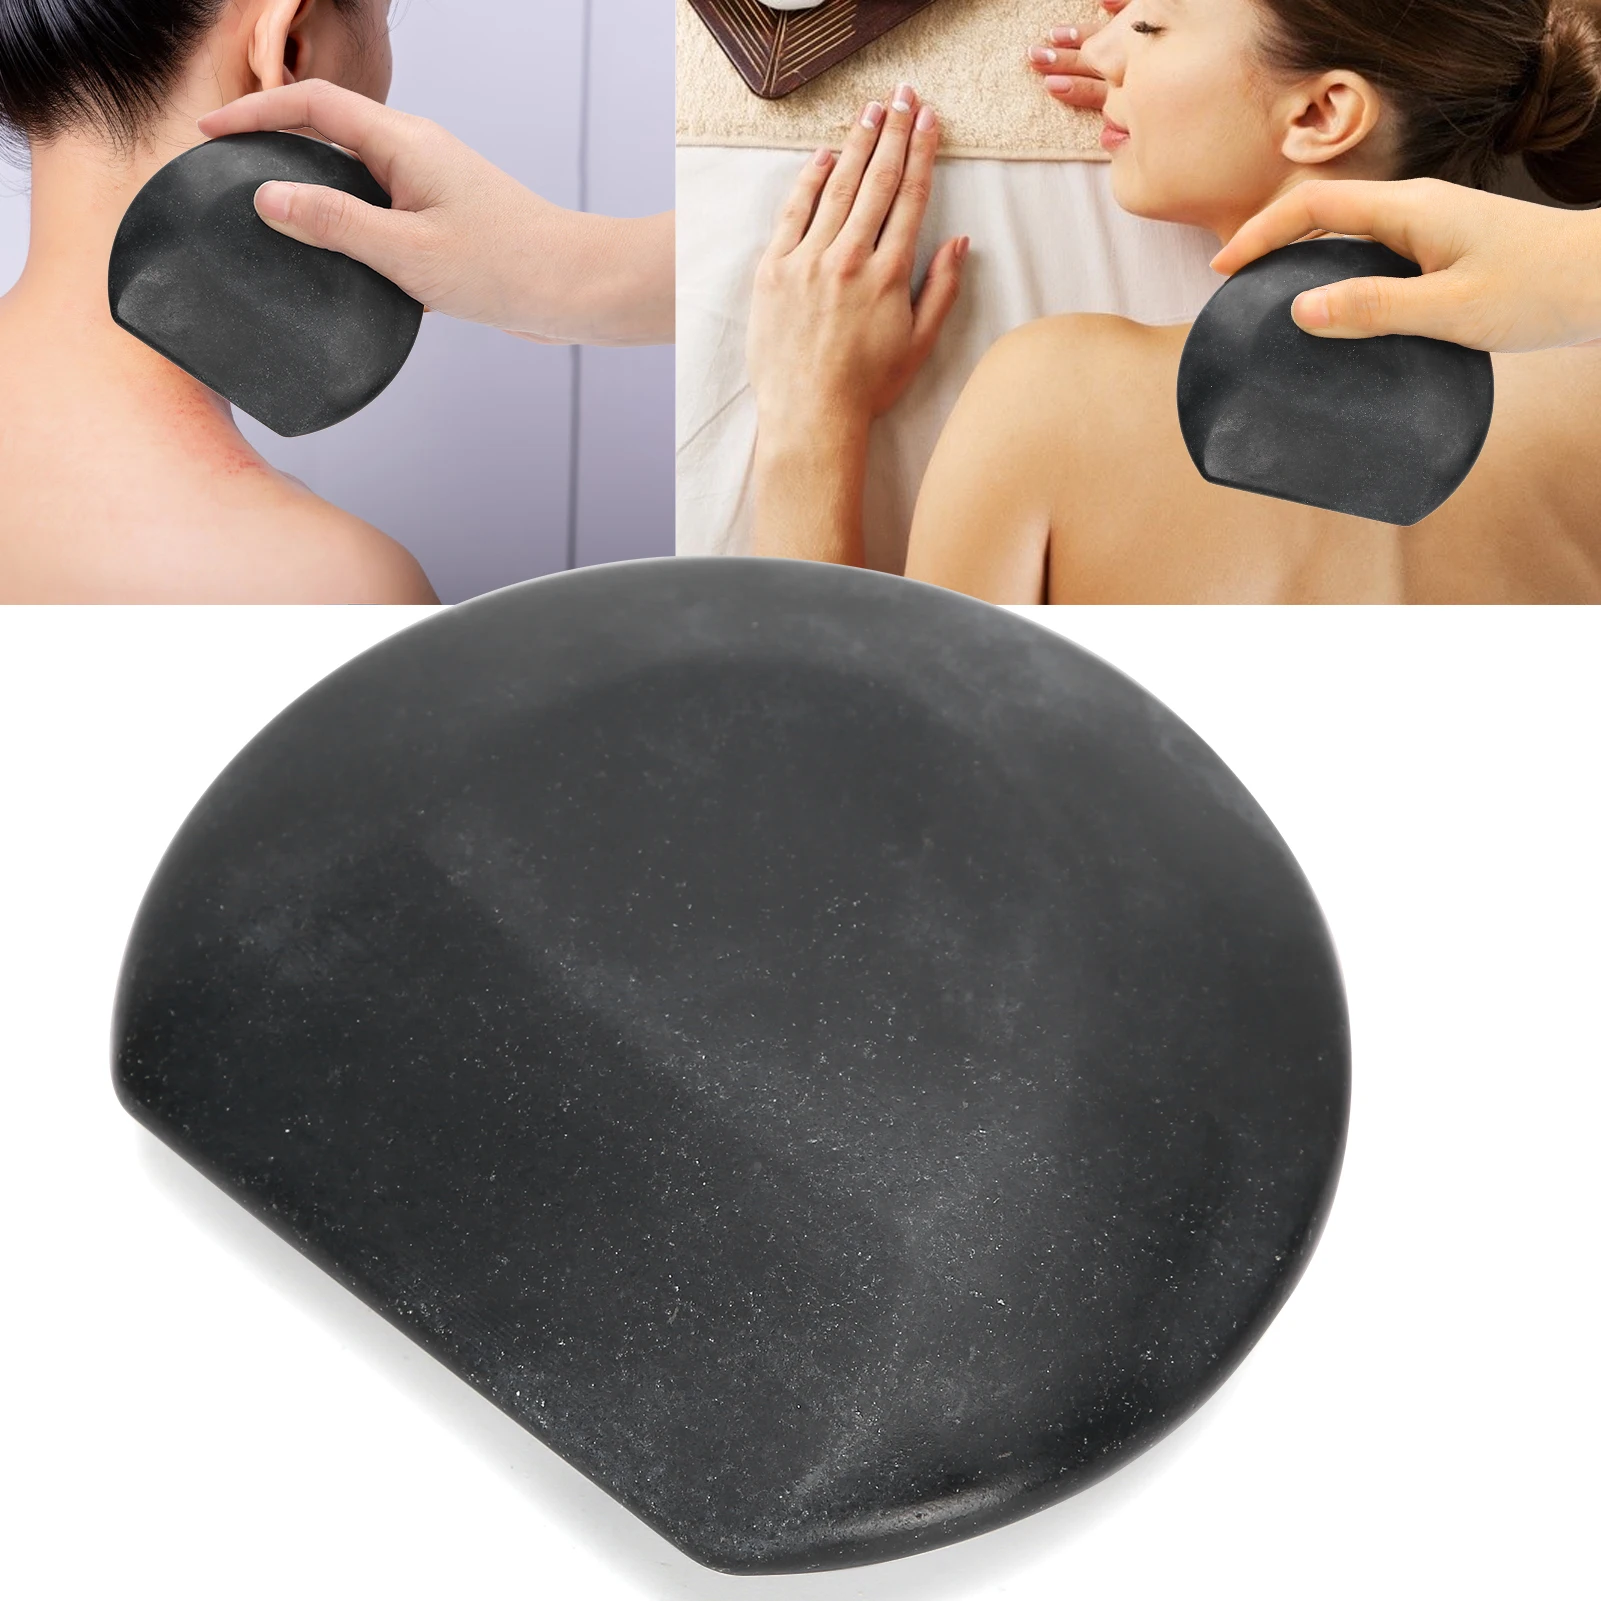 

Hot Spa Gua Sha Massage Stone Household Back Abdomen Scaping Massage Therapy Stone With Bag Skin Lifting Beauty Health Care Tool